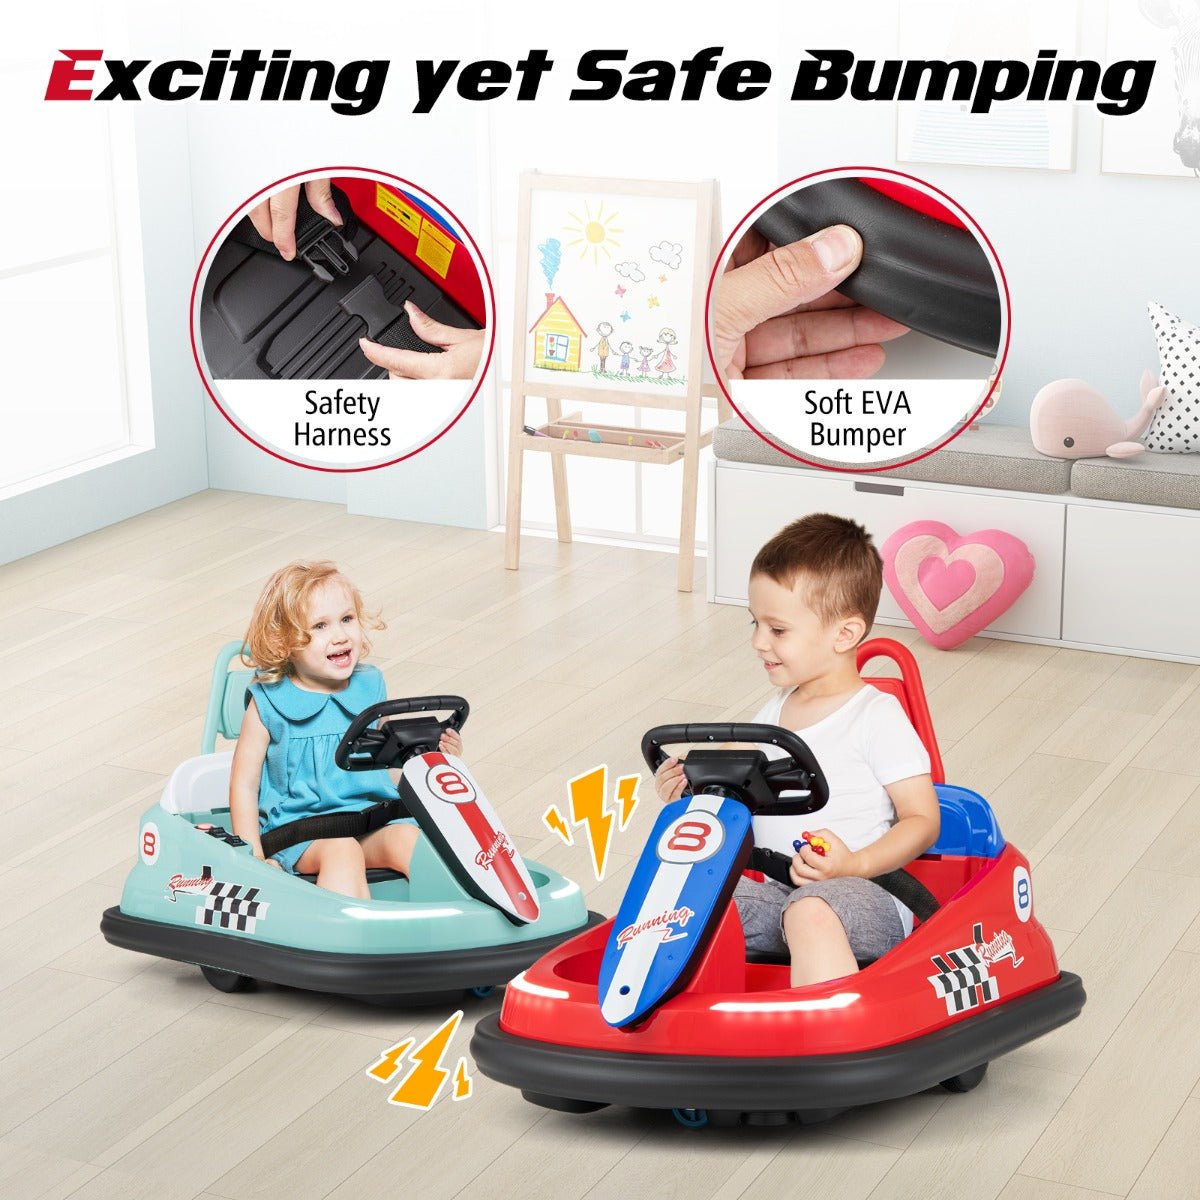 Kids' Favourite Red Electric Bumper Car with Easy Controls